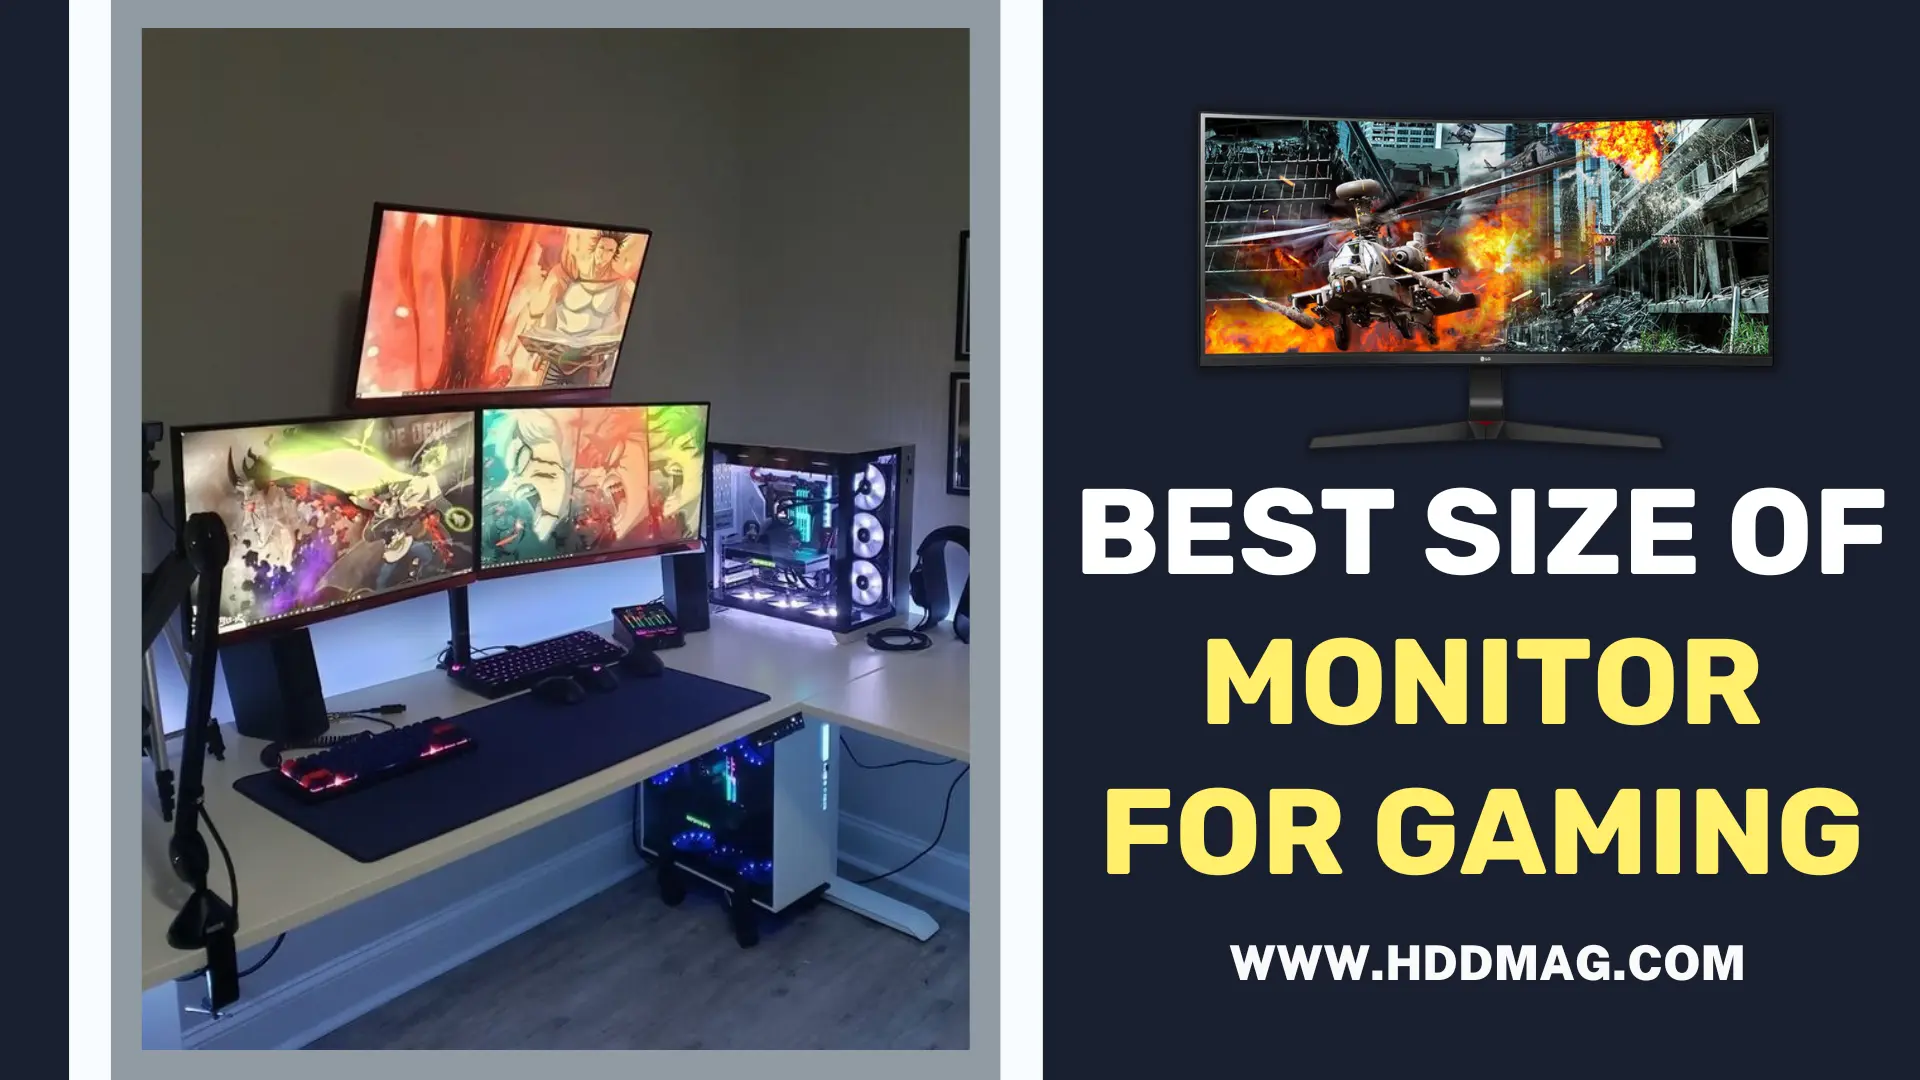 The Best Size of Monitor for Gaming